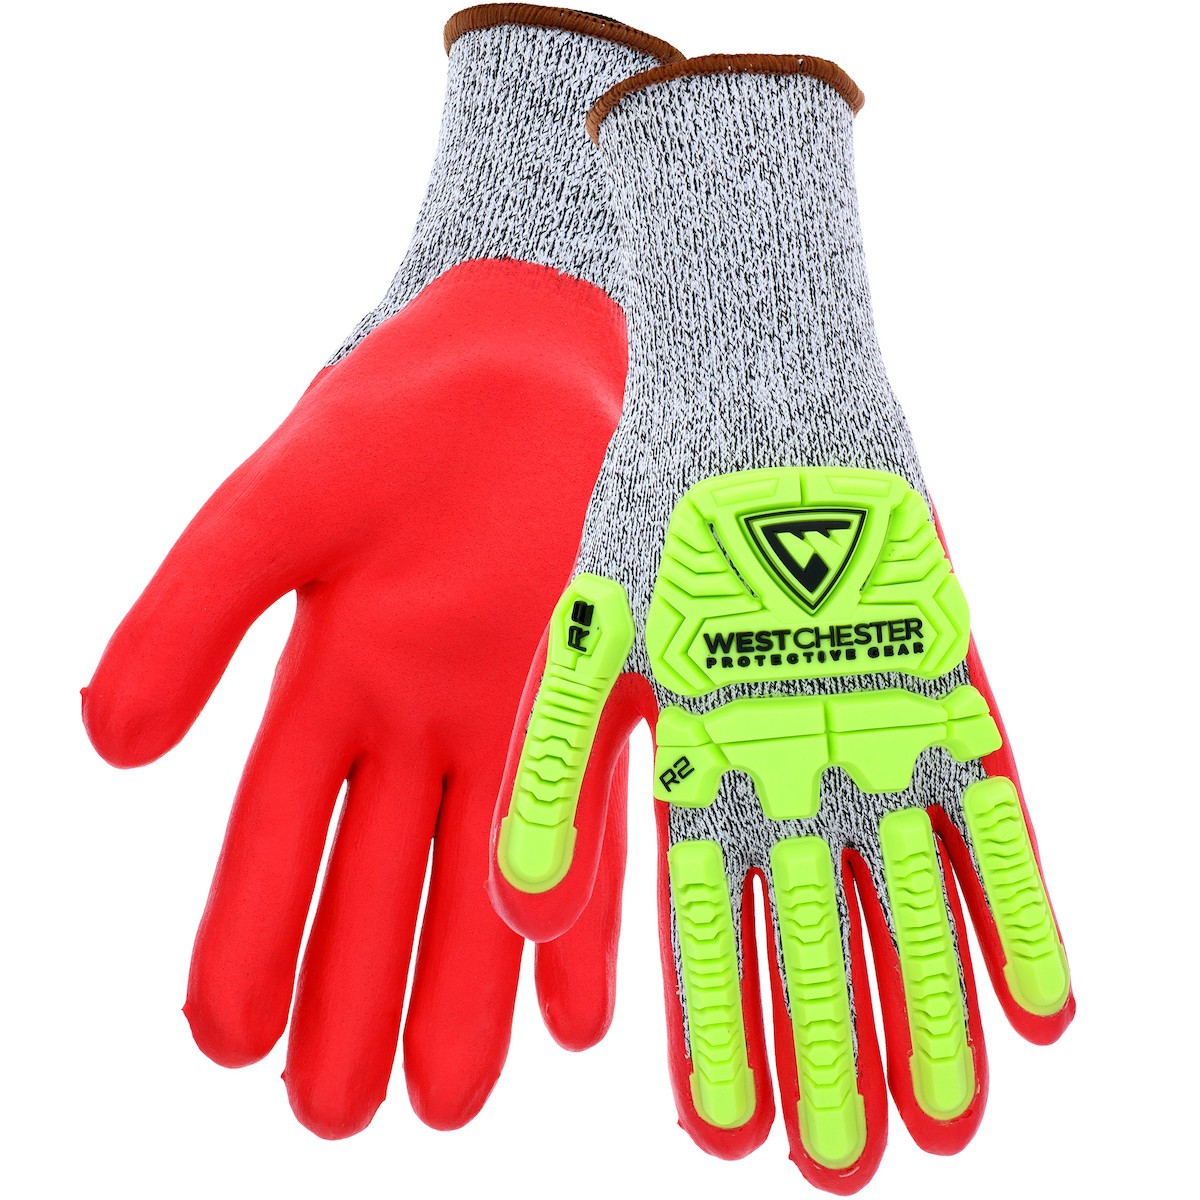 G-Tek® Seamless Knit HPPE Blended Glove with Impact Protection and Red Nitrile Foam Coated Palm & Fingers  (#713SNTPRG)